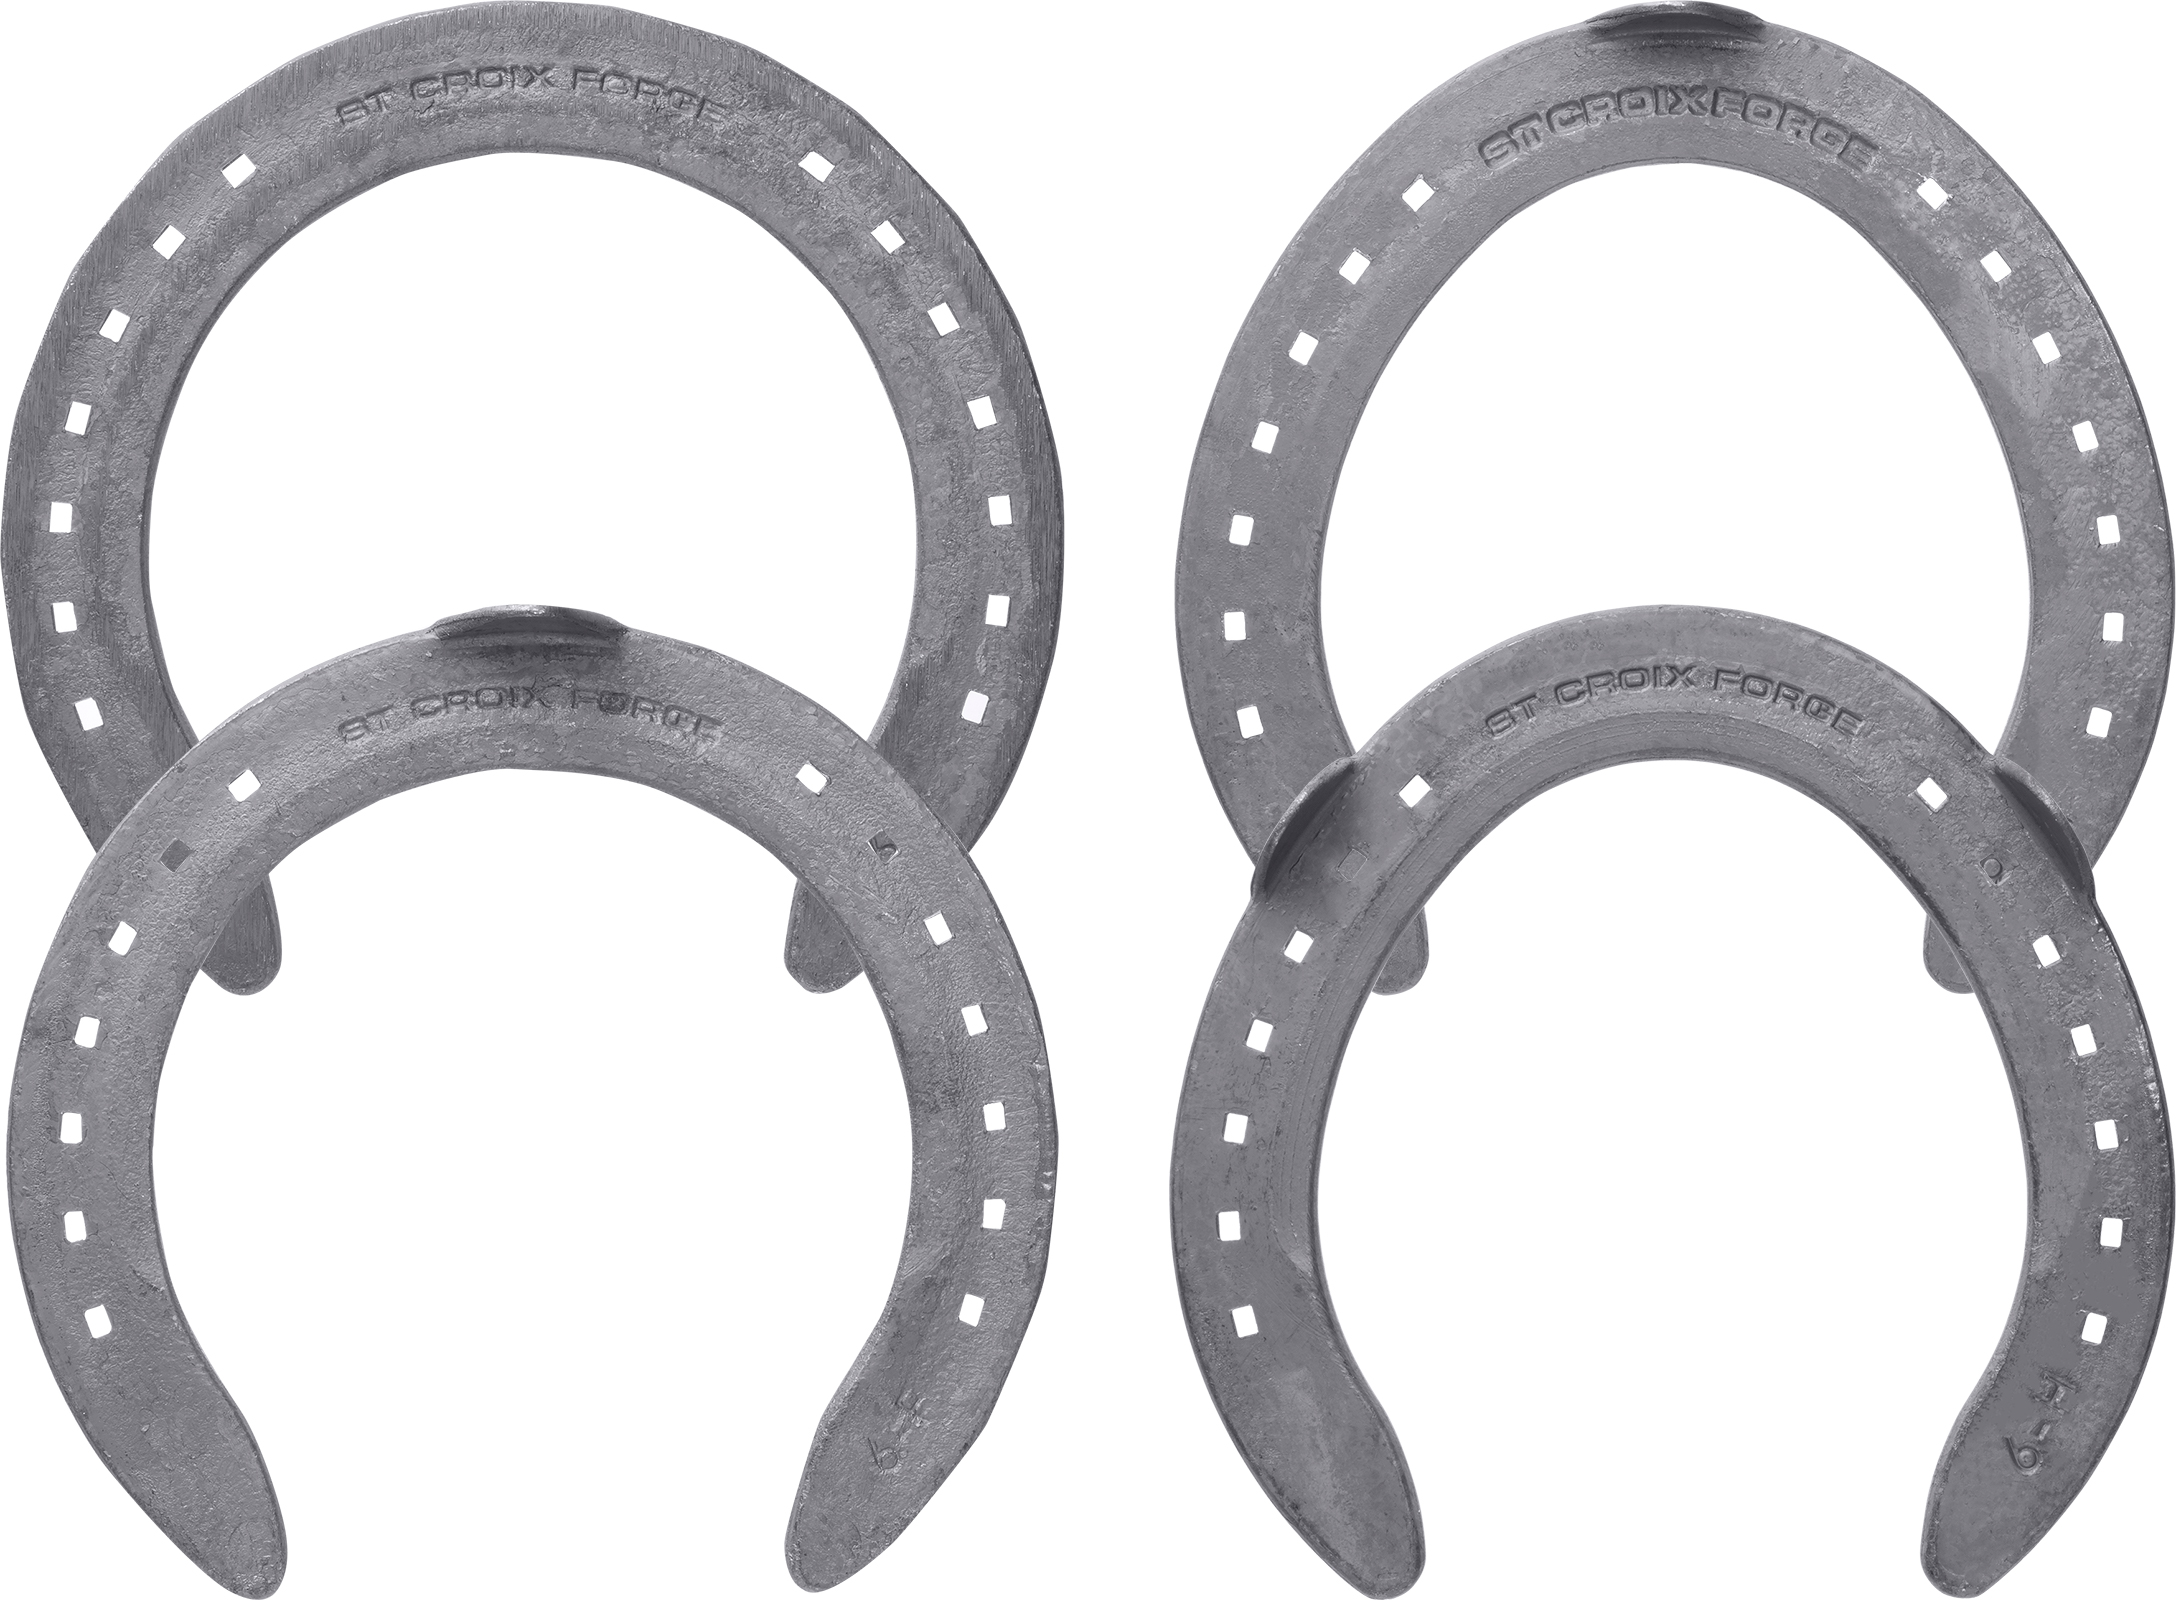 St. Croix Concorde Steel horseshoes, front unclipped and toe clip, hind toe clip and side clips, hoof side view